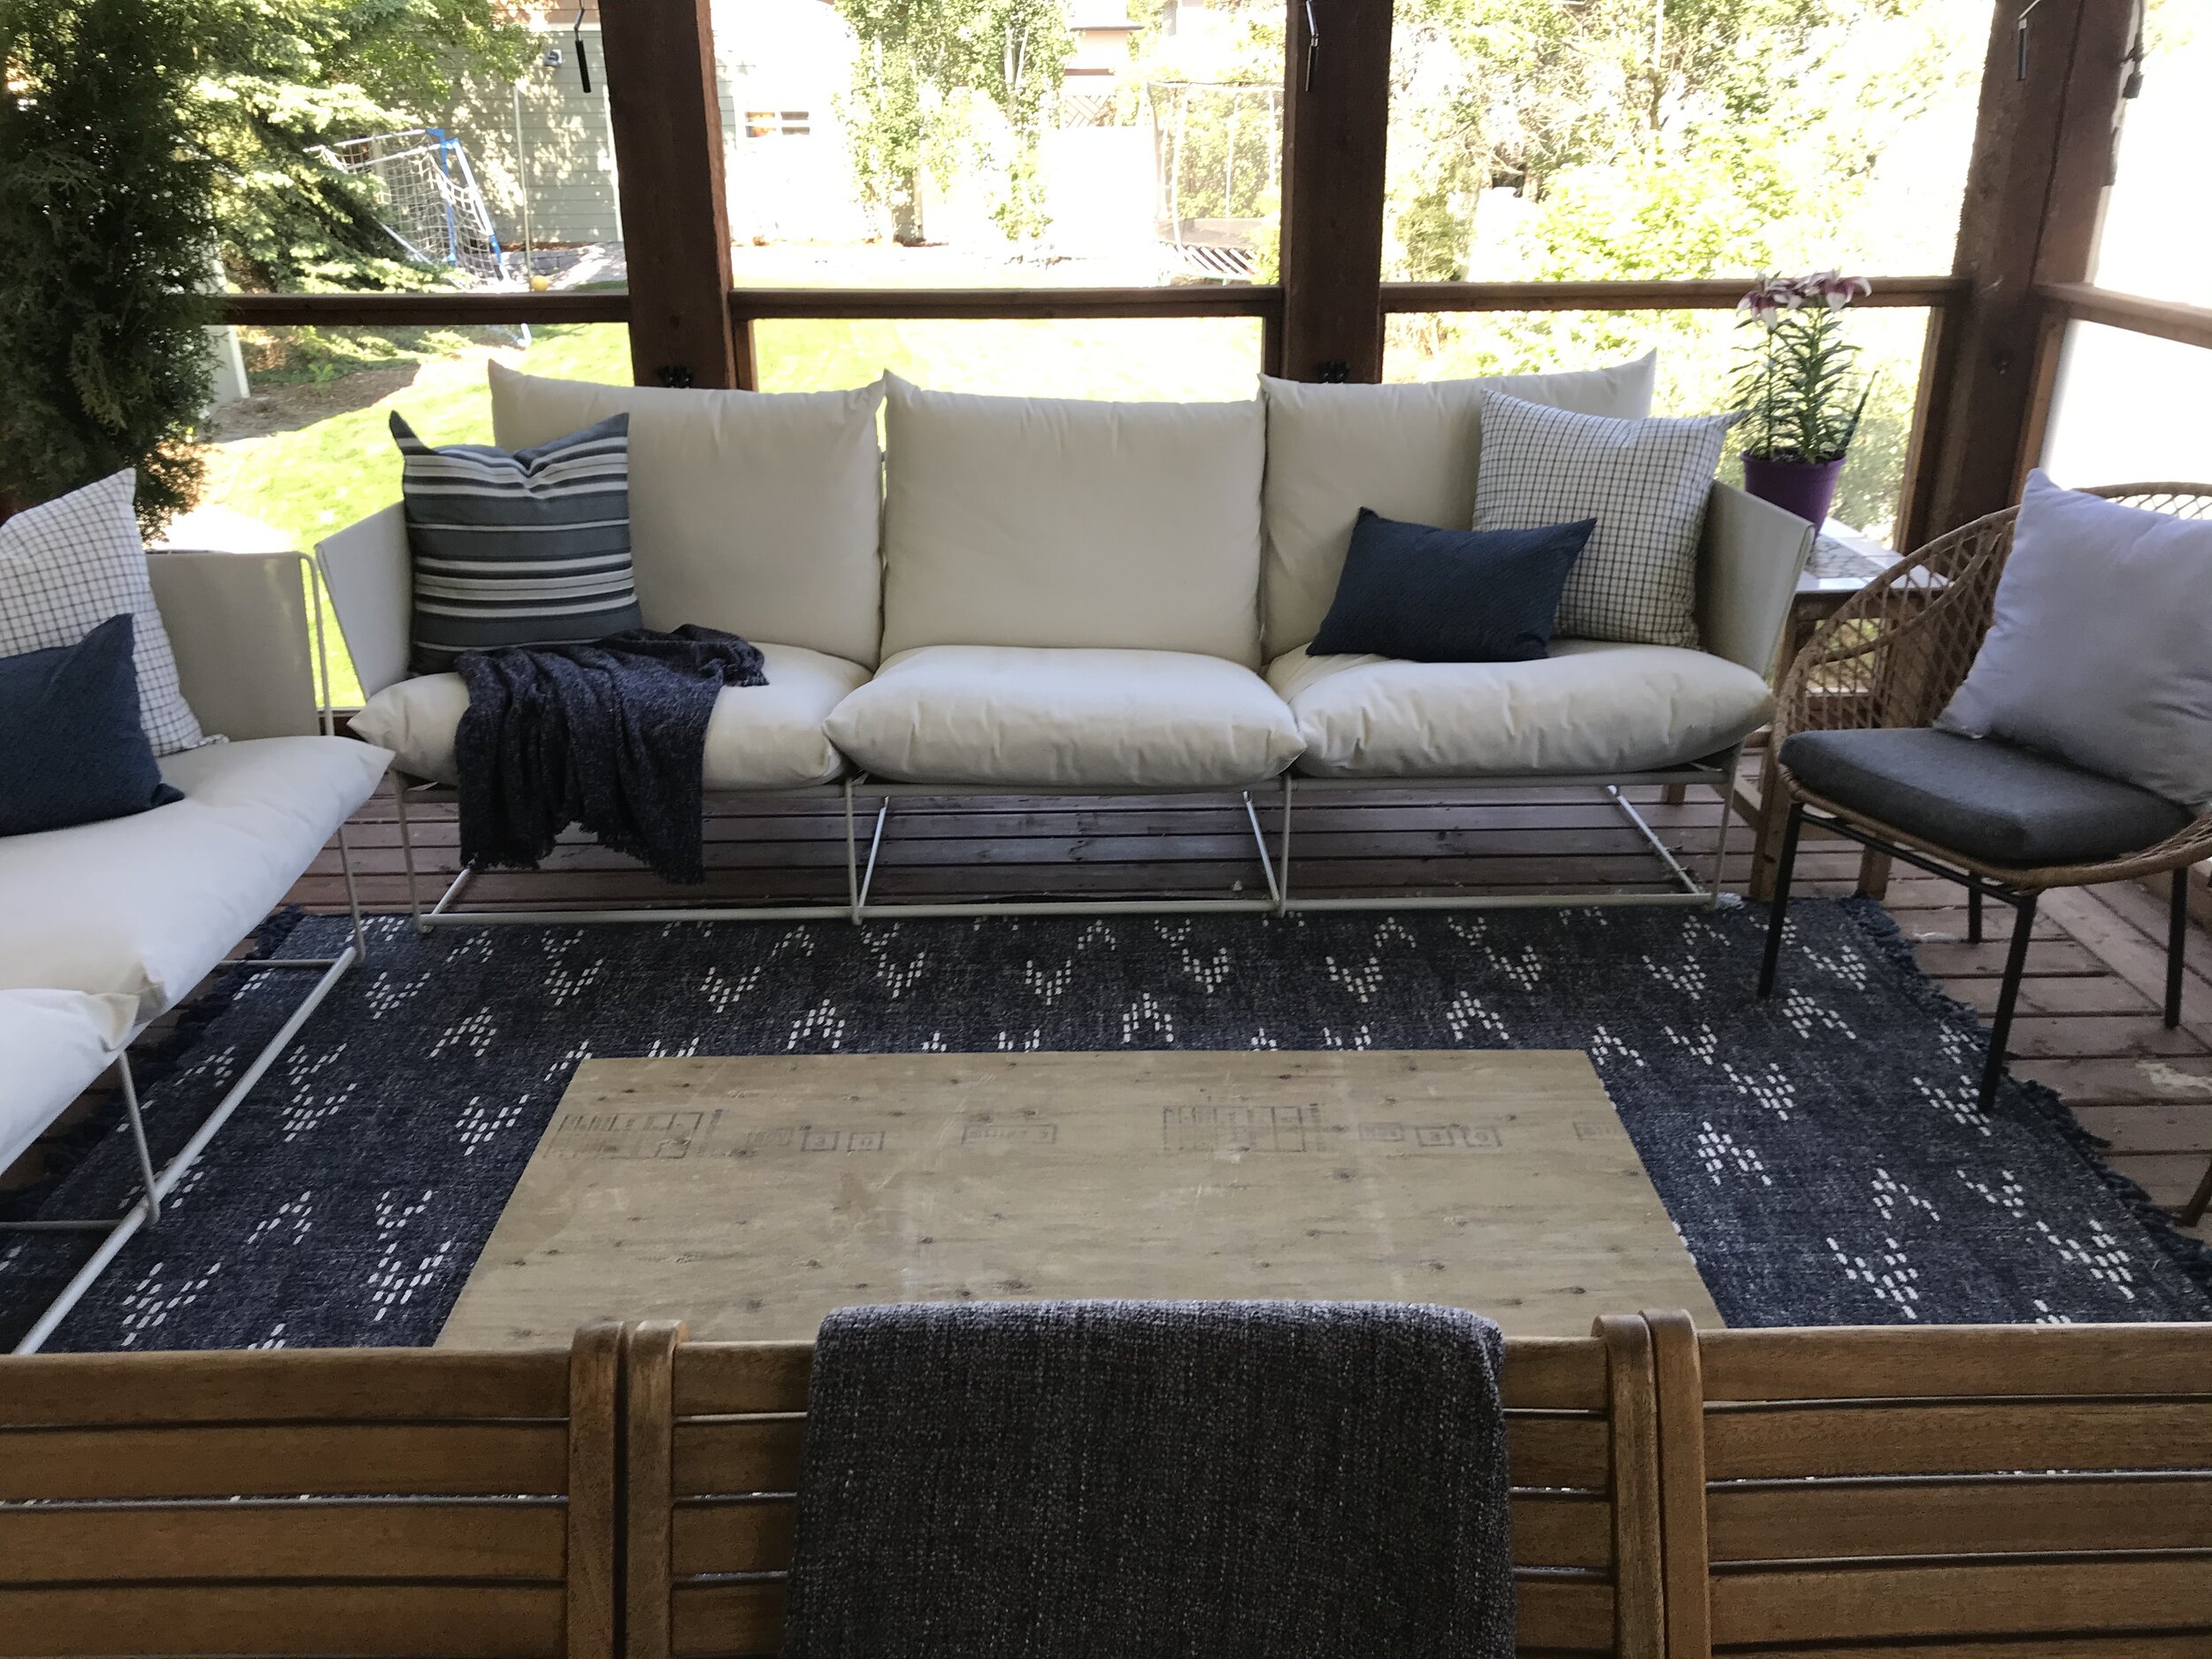 outdoor patio with outdoor couches, blue outdoor rug and a piece of plywood on the ground to get an idea of size